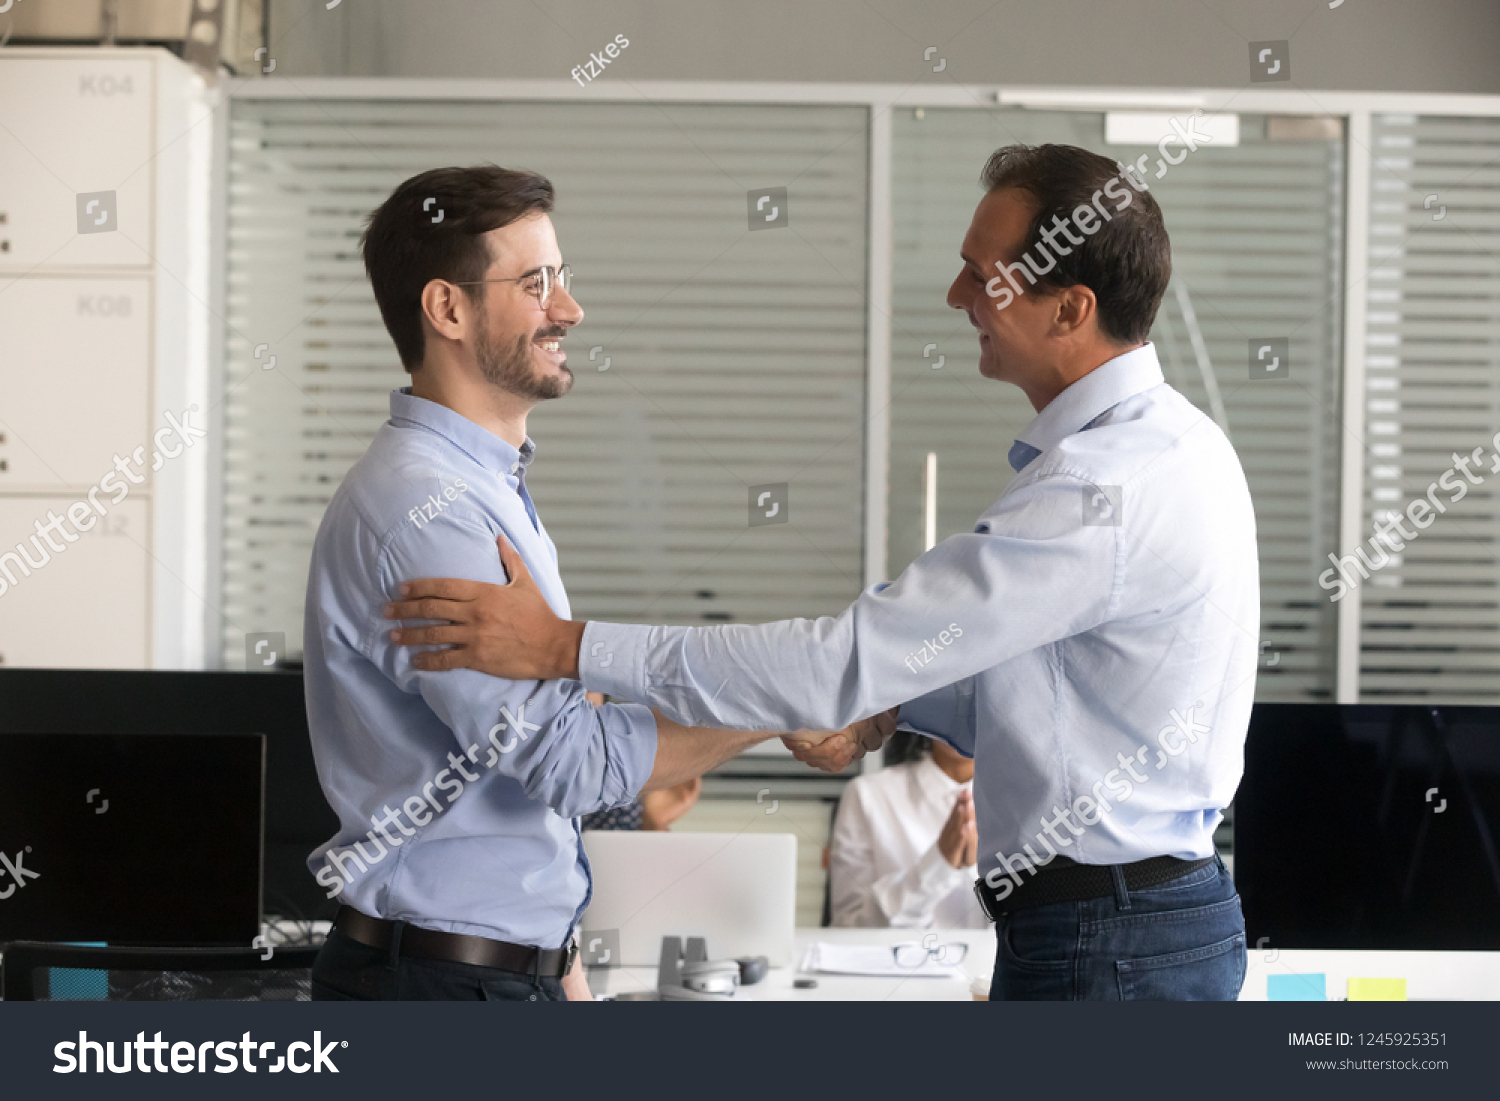 Friendly middle aged boss handshaking male successful employee, congratulate confident worker with promotion, business achievement, thank for good work results, expressing respect, rewarding #1245925351